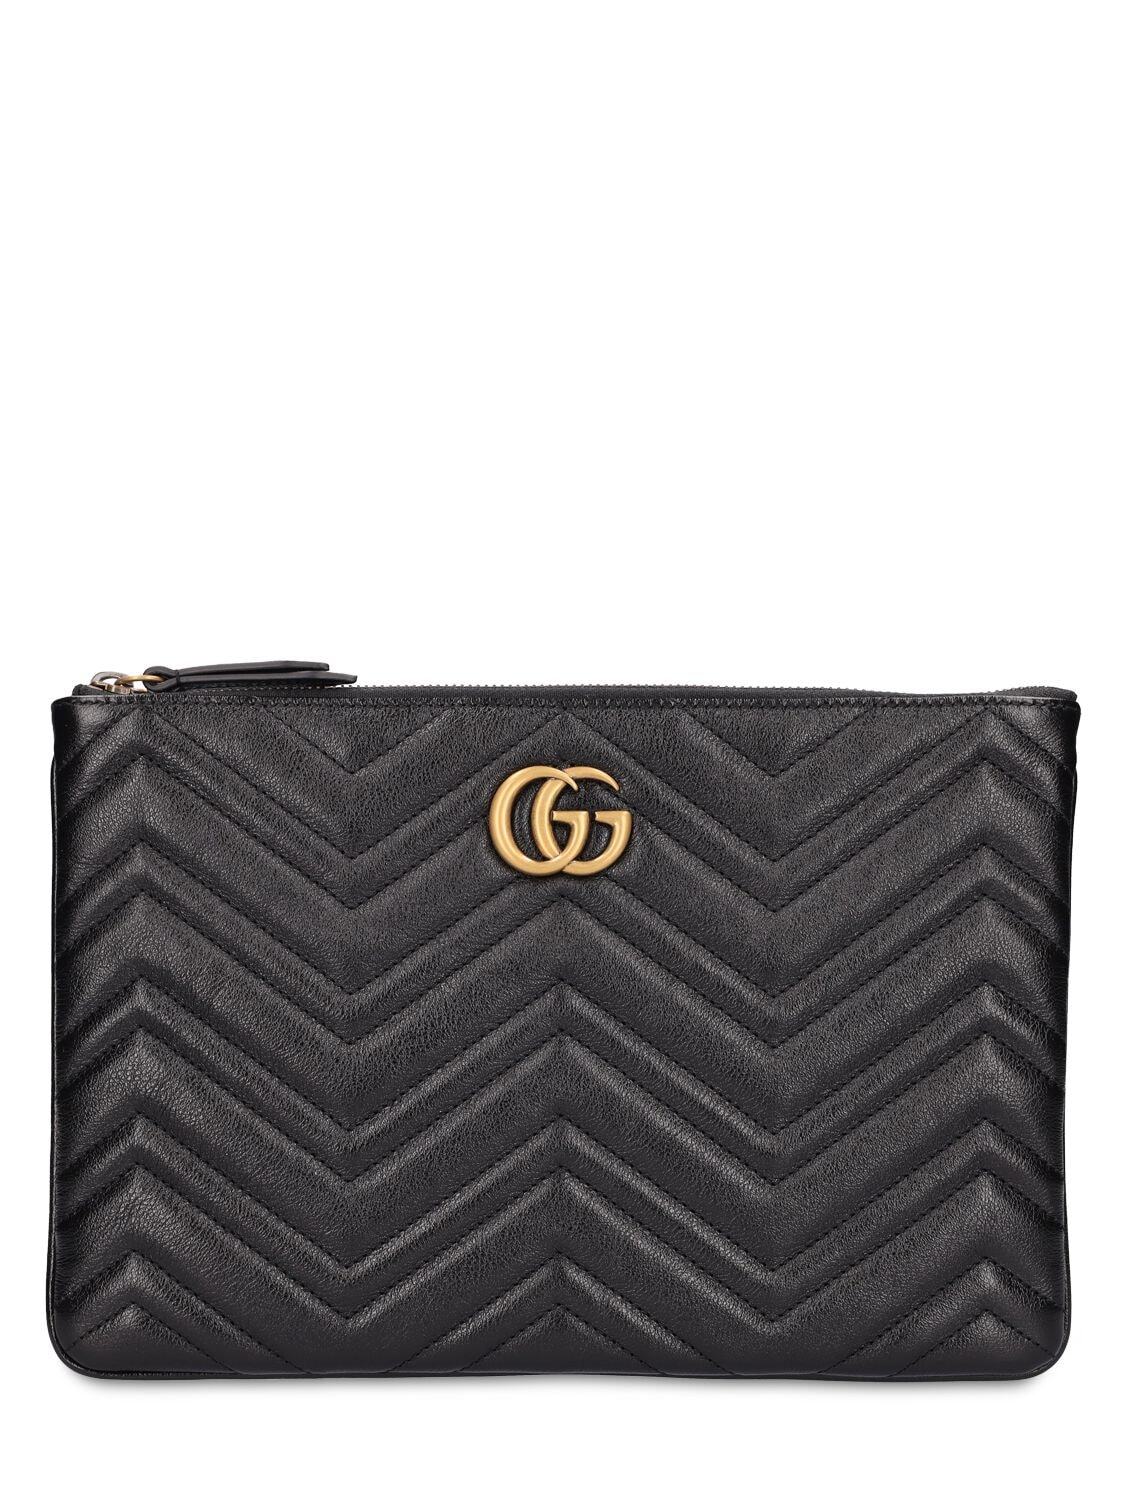 GUCCI Gg Marmont 2.0 Leather Pouch in black